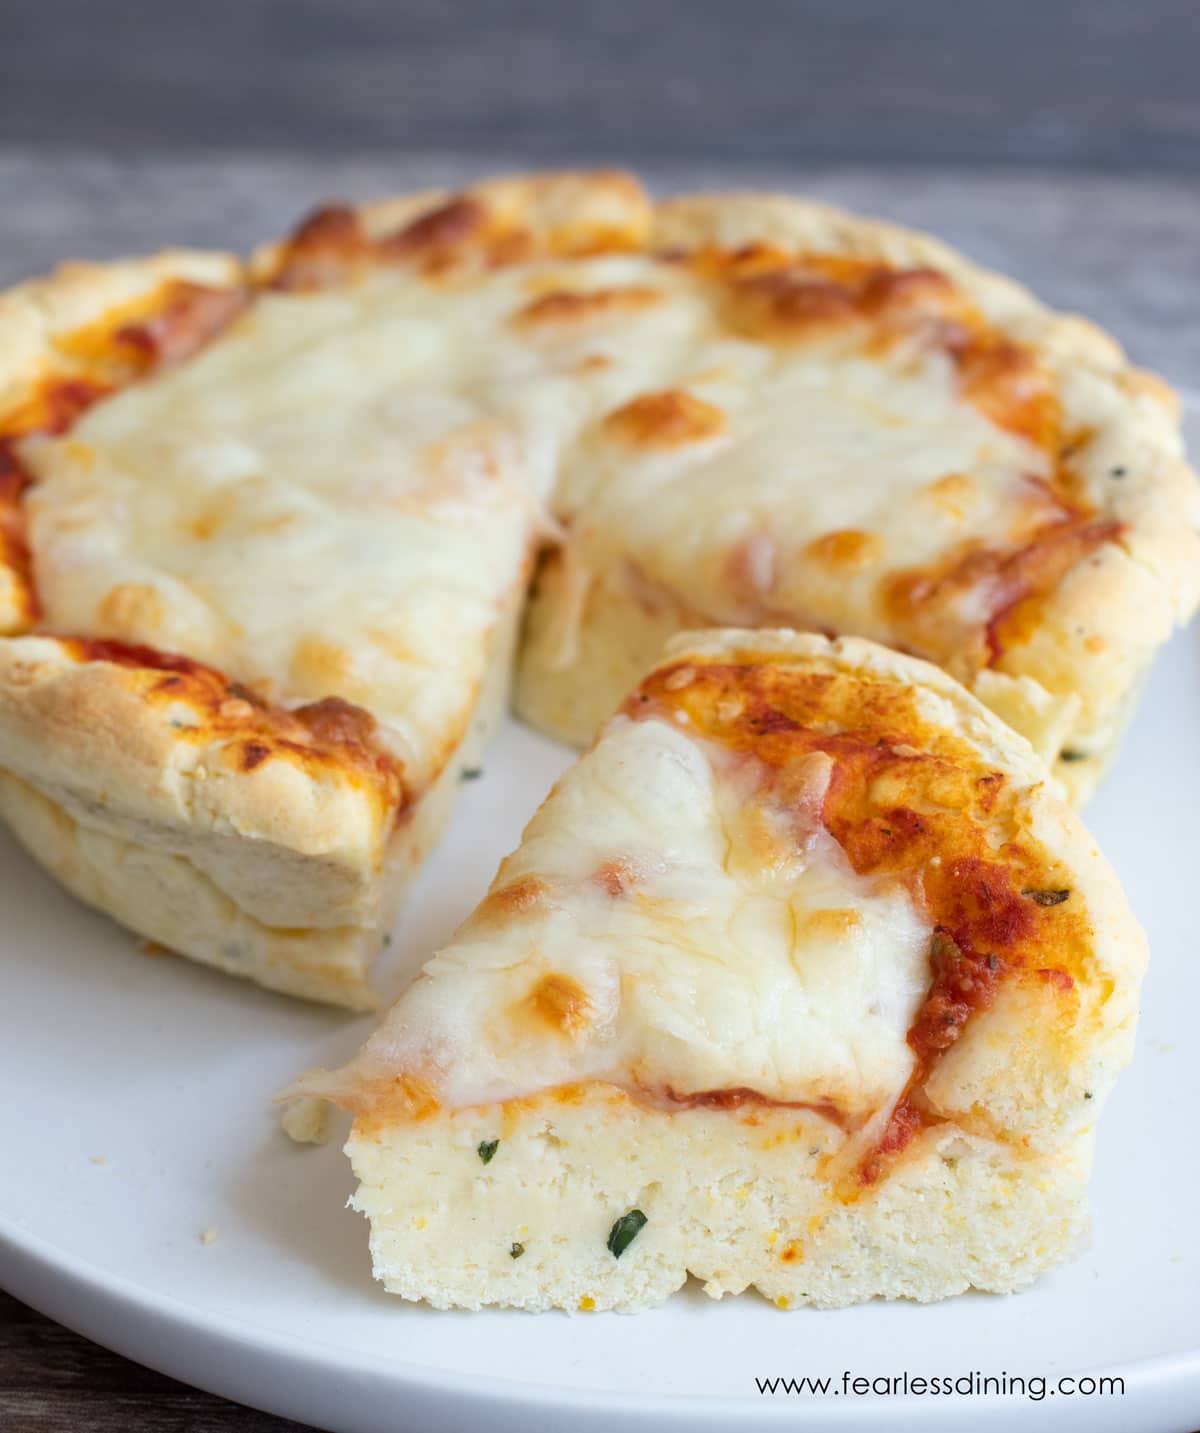 a slice of gluten free deep dish pizza on a plate.